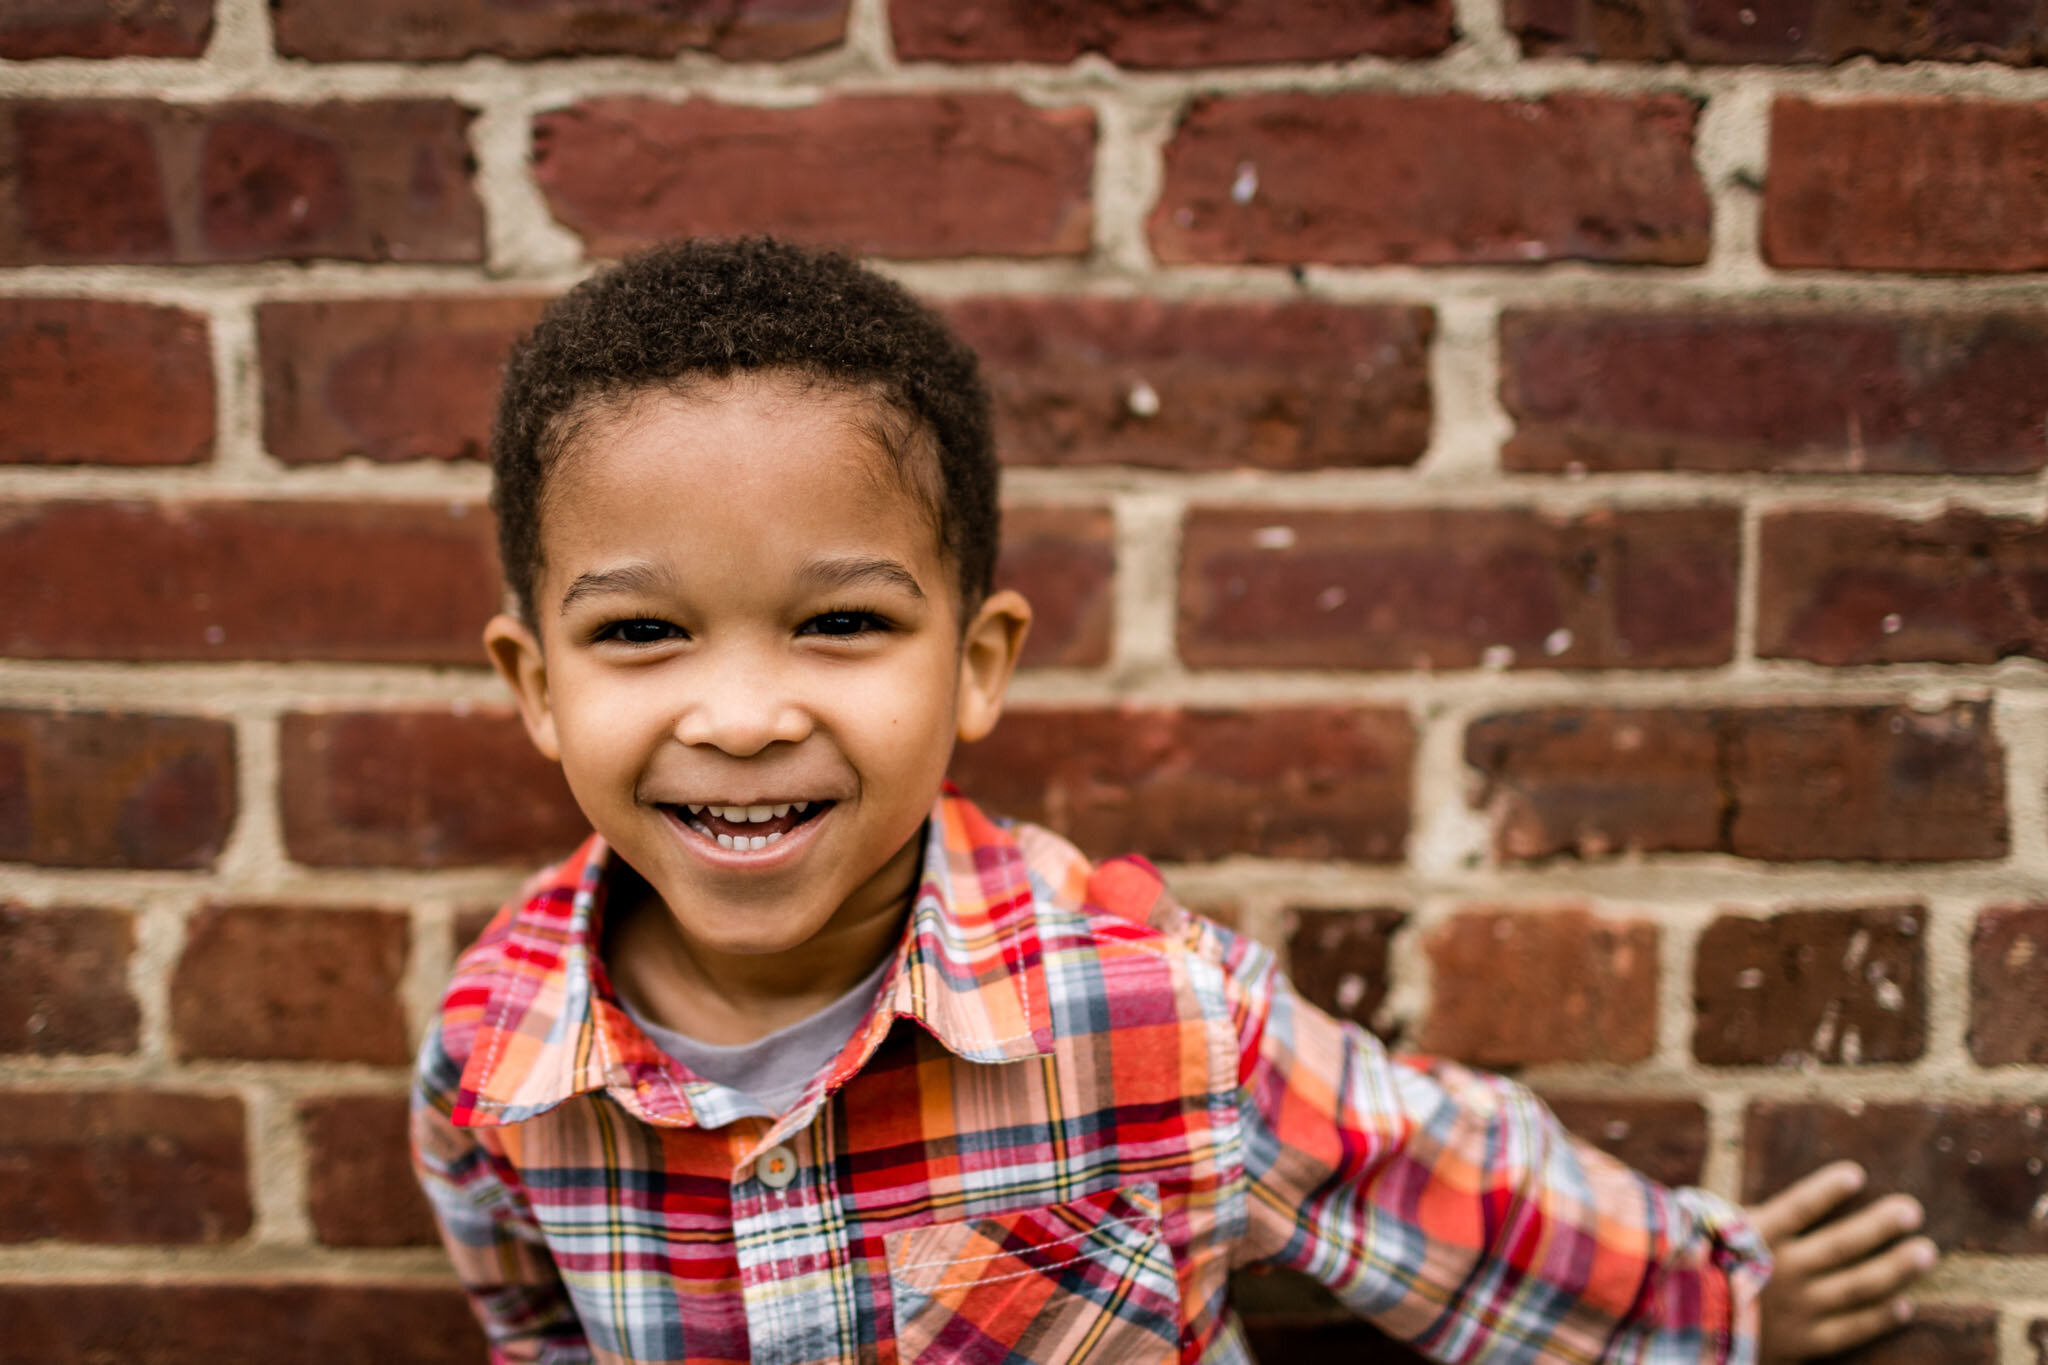 Toddler boy laughing and standing against brick wall | Durham Family Photographer | By G. Lin Photography